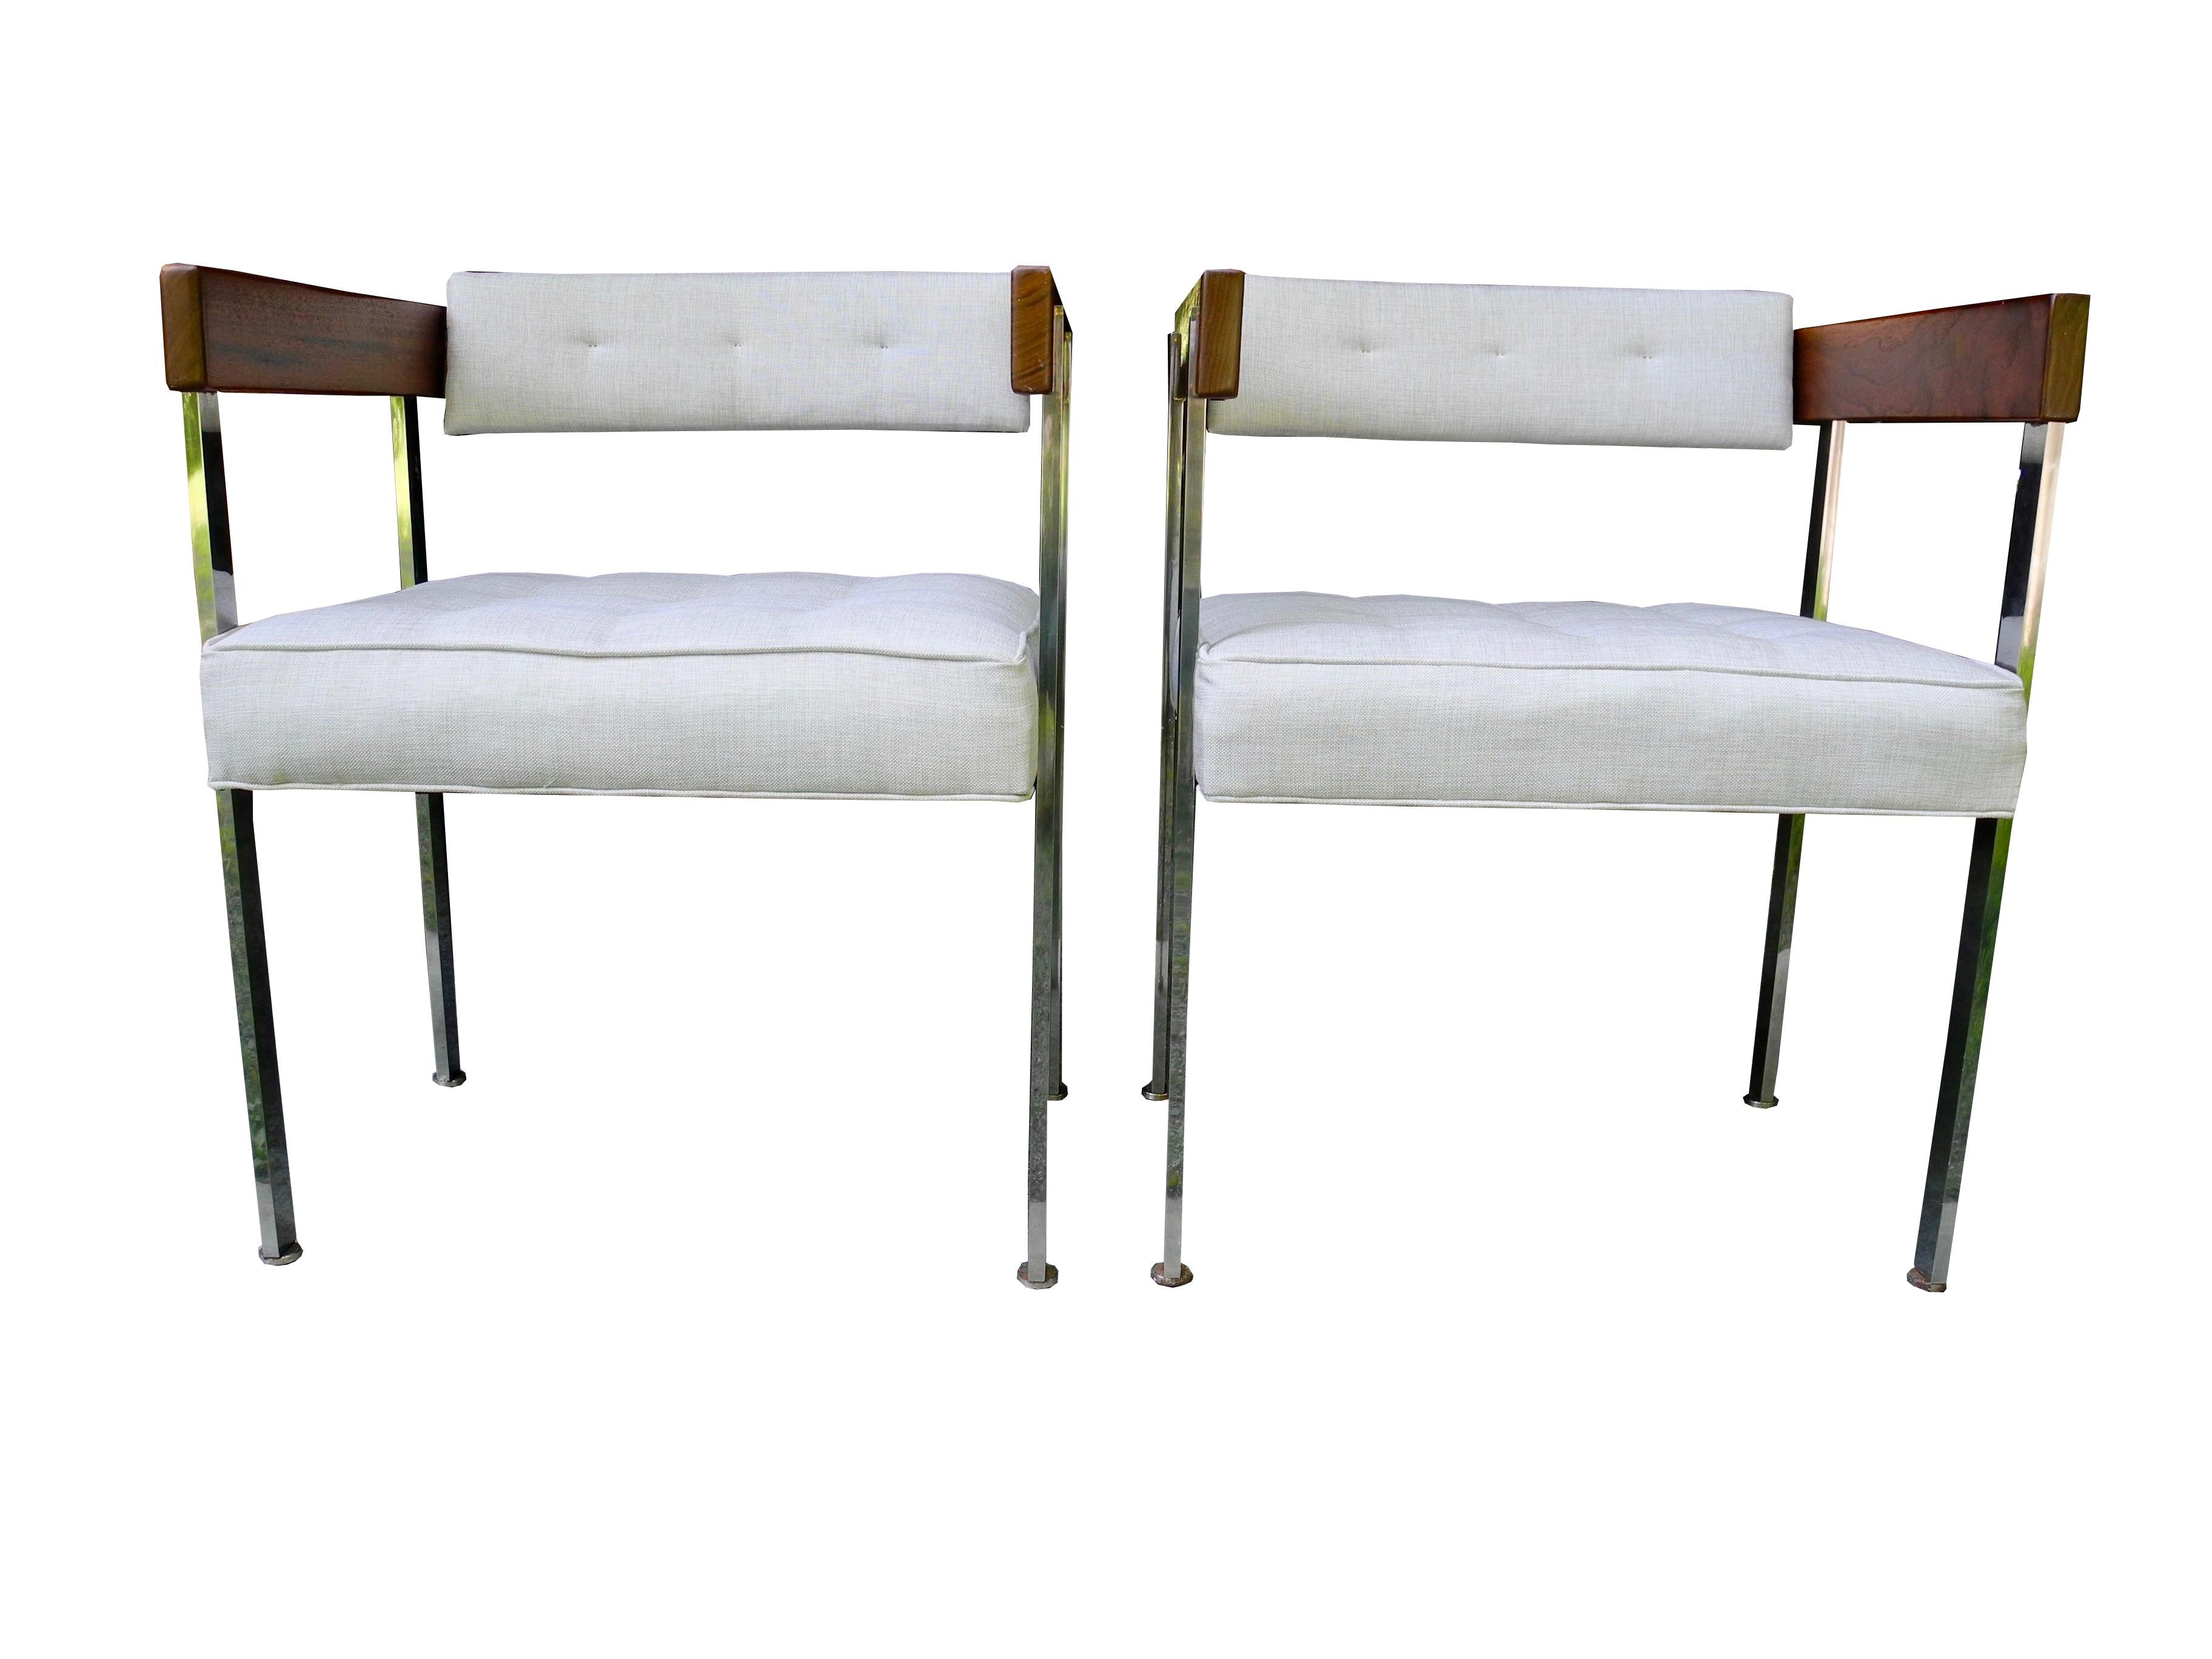 These upholstered pull-up chairs are designed by Harvey Probber for the living room or office. Upholstered in a linen blend neutral fabric with walnut arms and a solid polished stainless steel base. Sold as a set but two more are available.